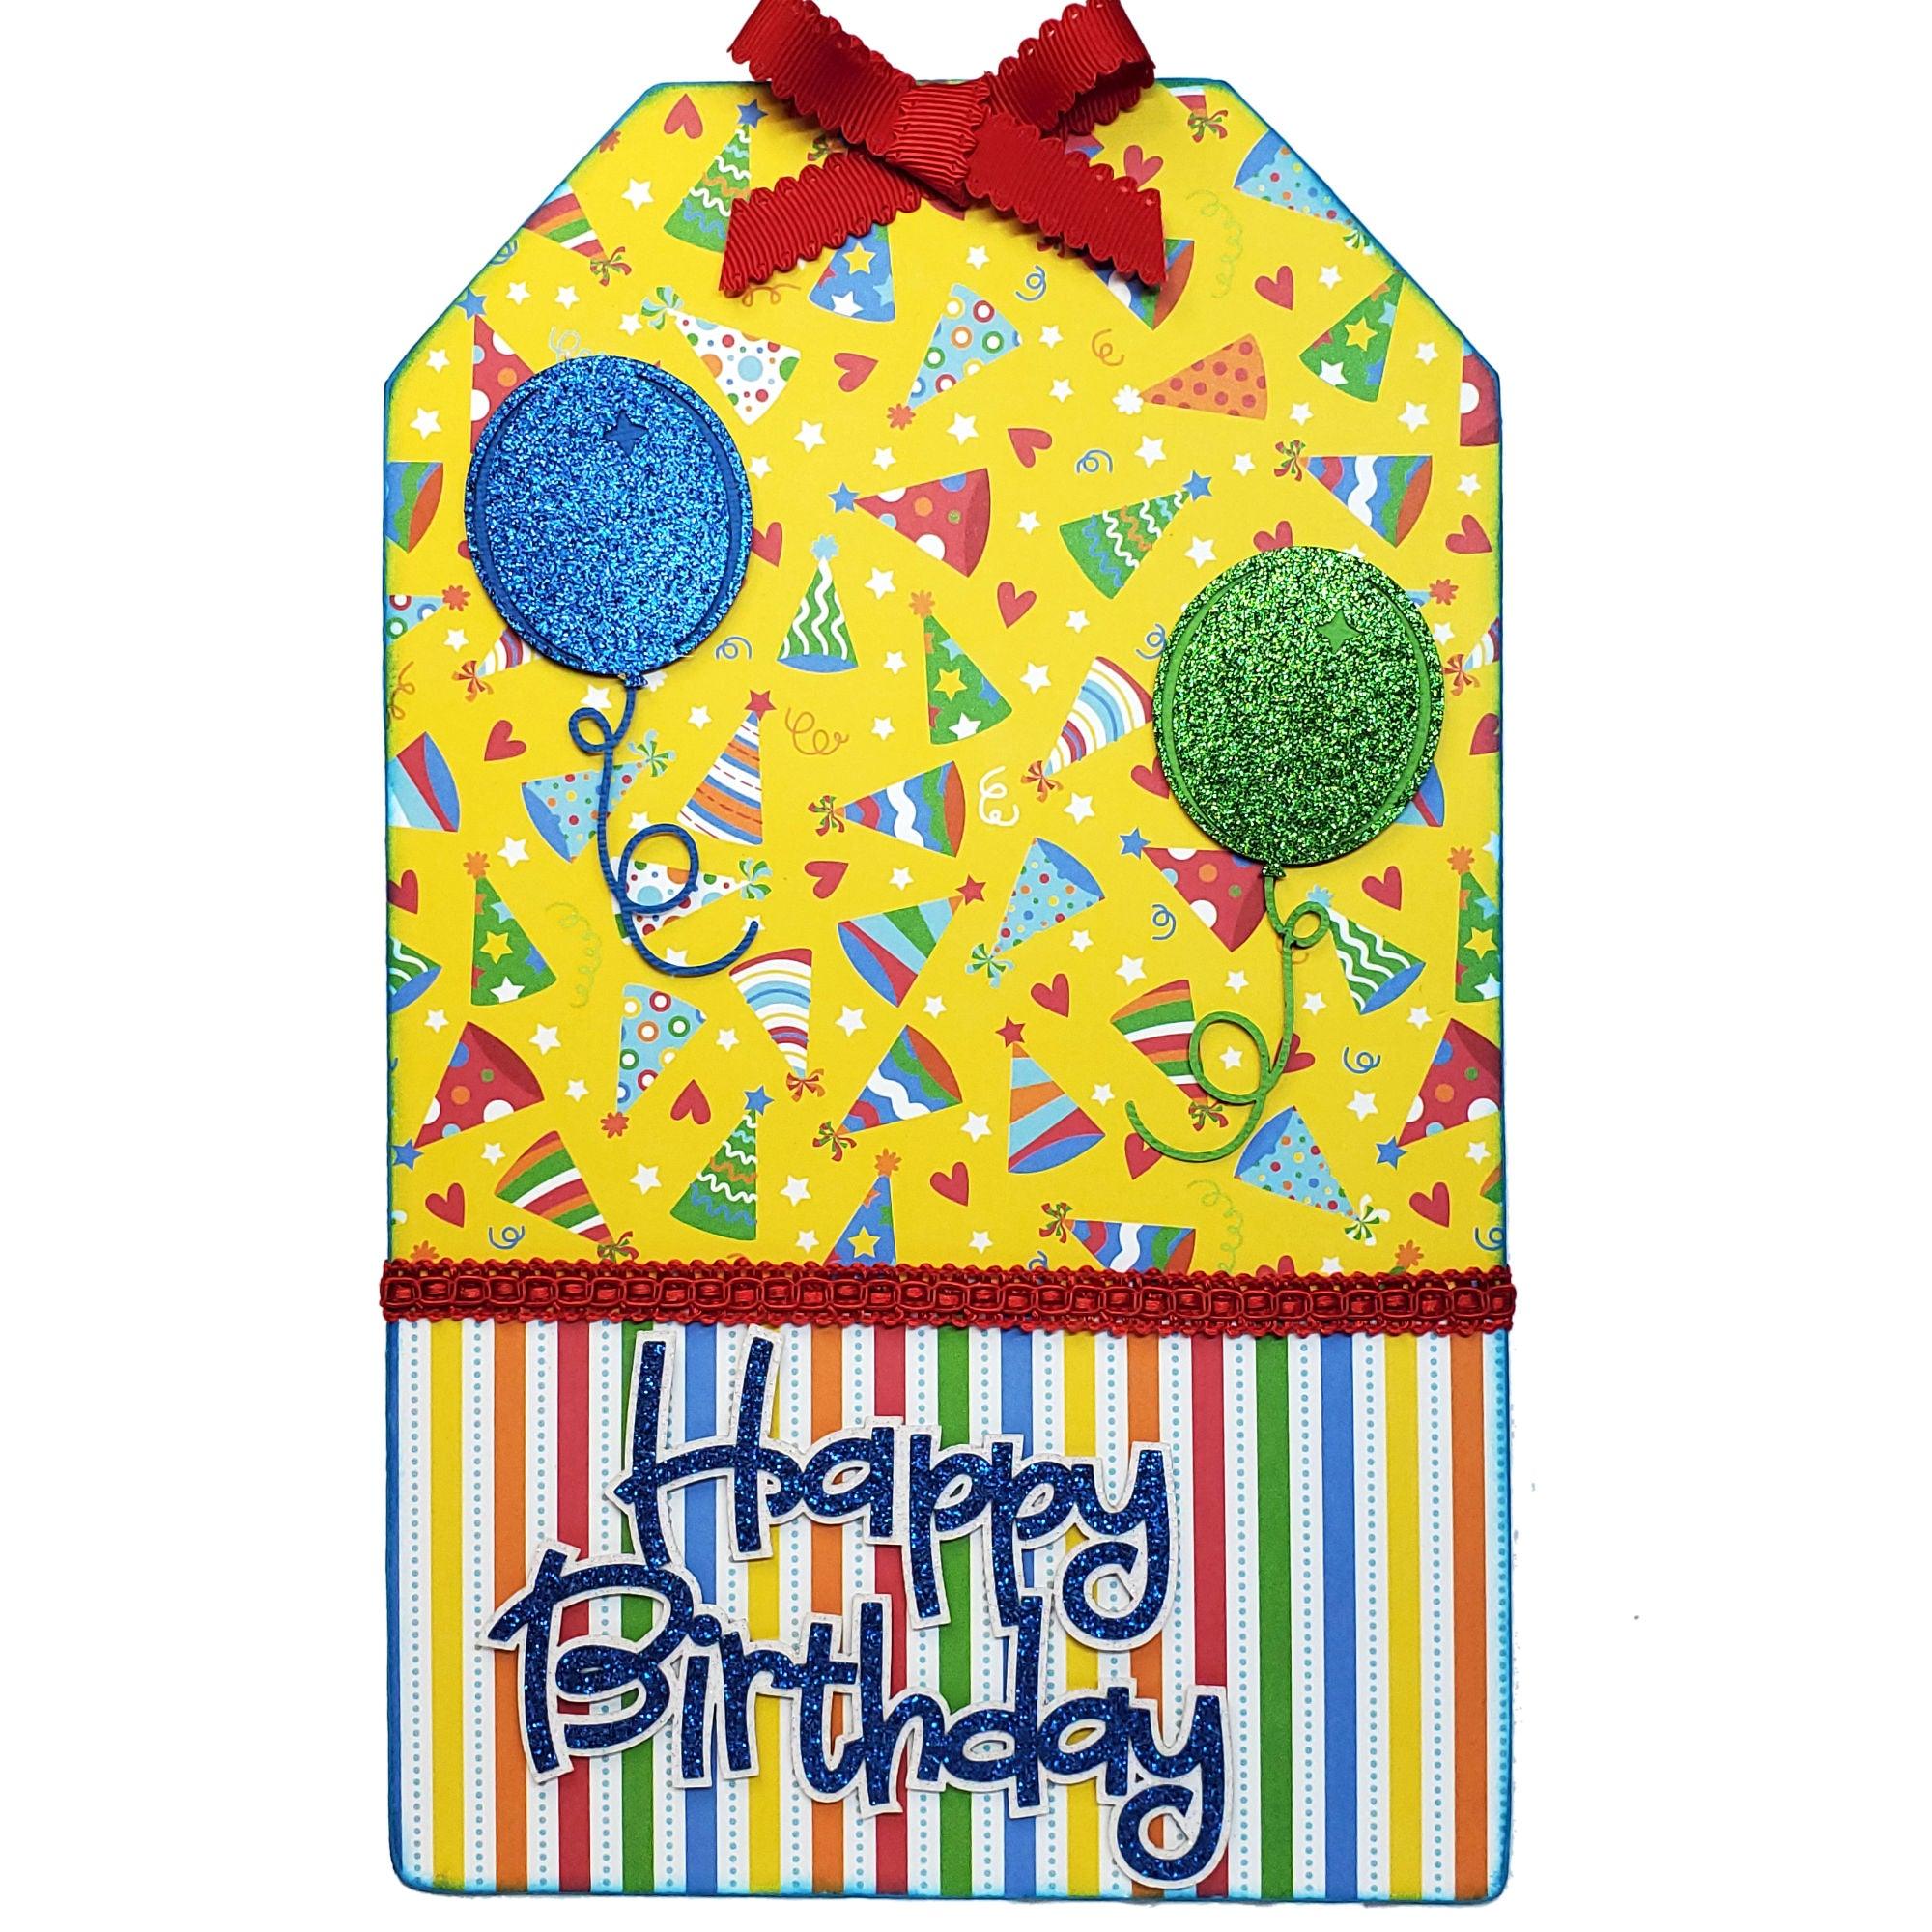 Birthday Boy 6.5 x 10 Interactive, Magnetic Photo Frame & Accessory Magnets by SSC Designs